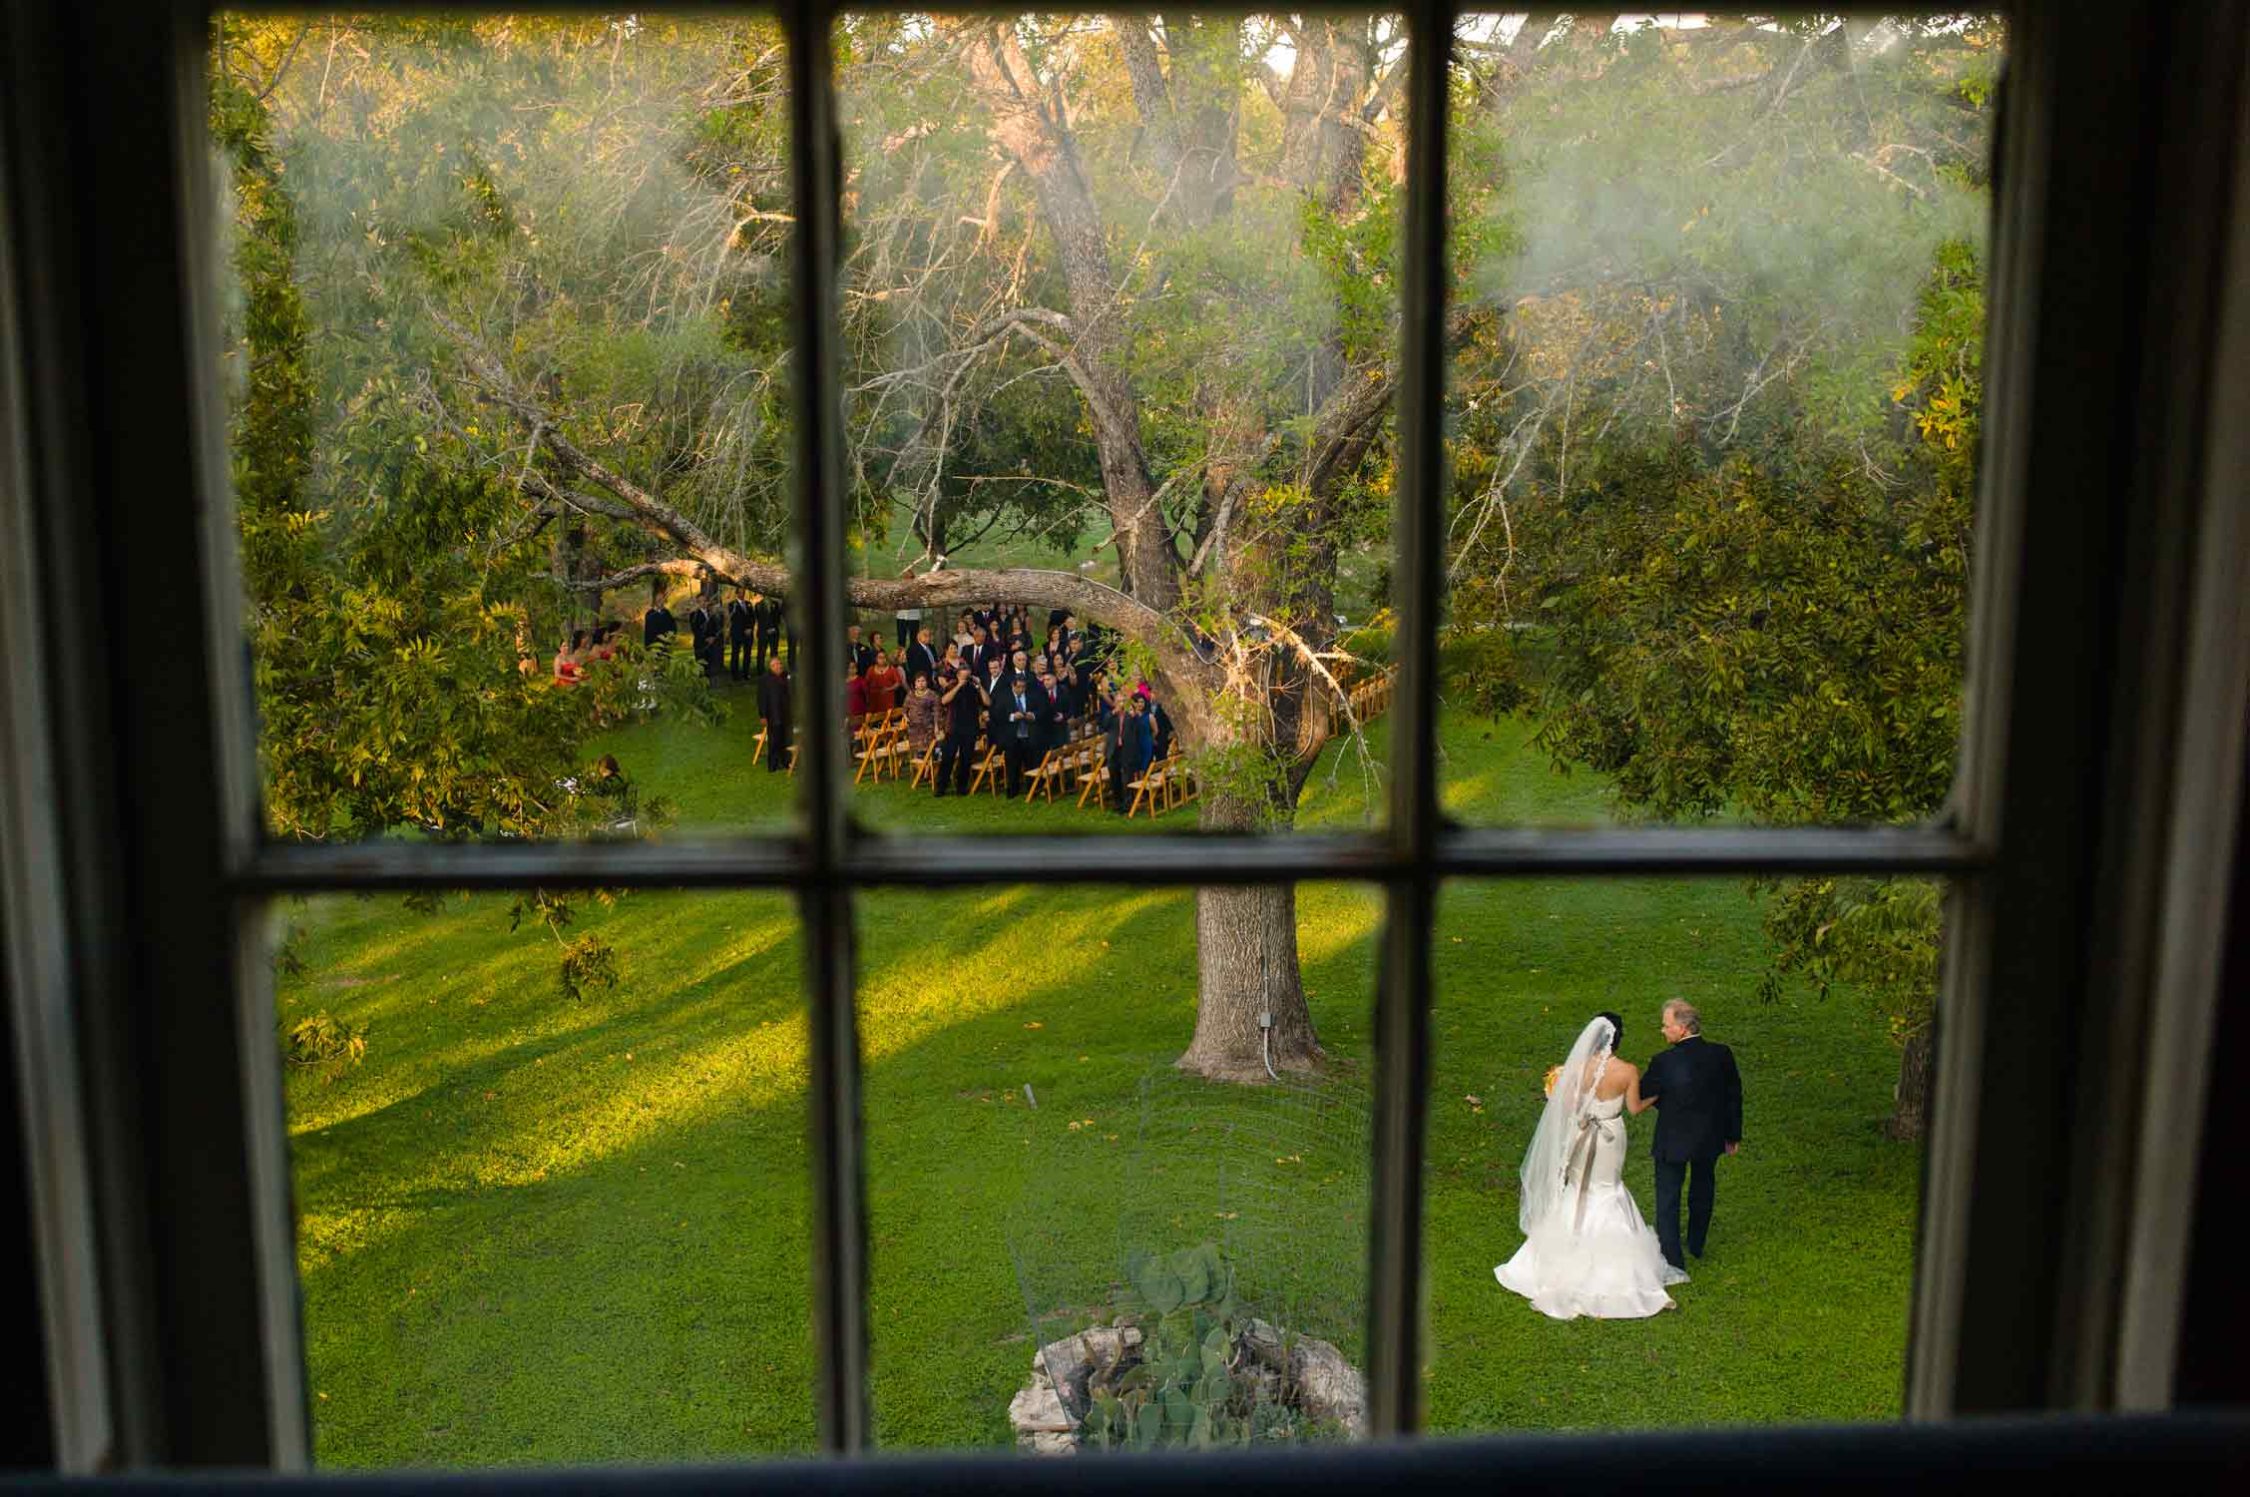 San Antonio Wedding Photographers - photographed at Don Strange Ranch, Texas as bride walks with her father - Leica M9